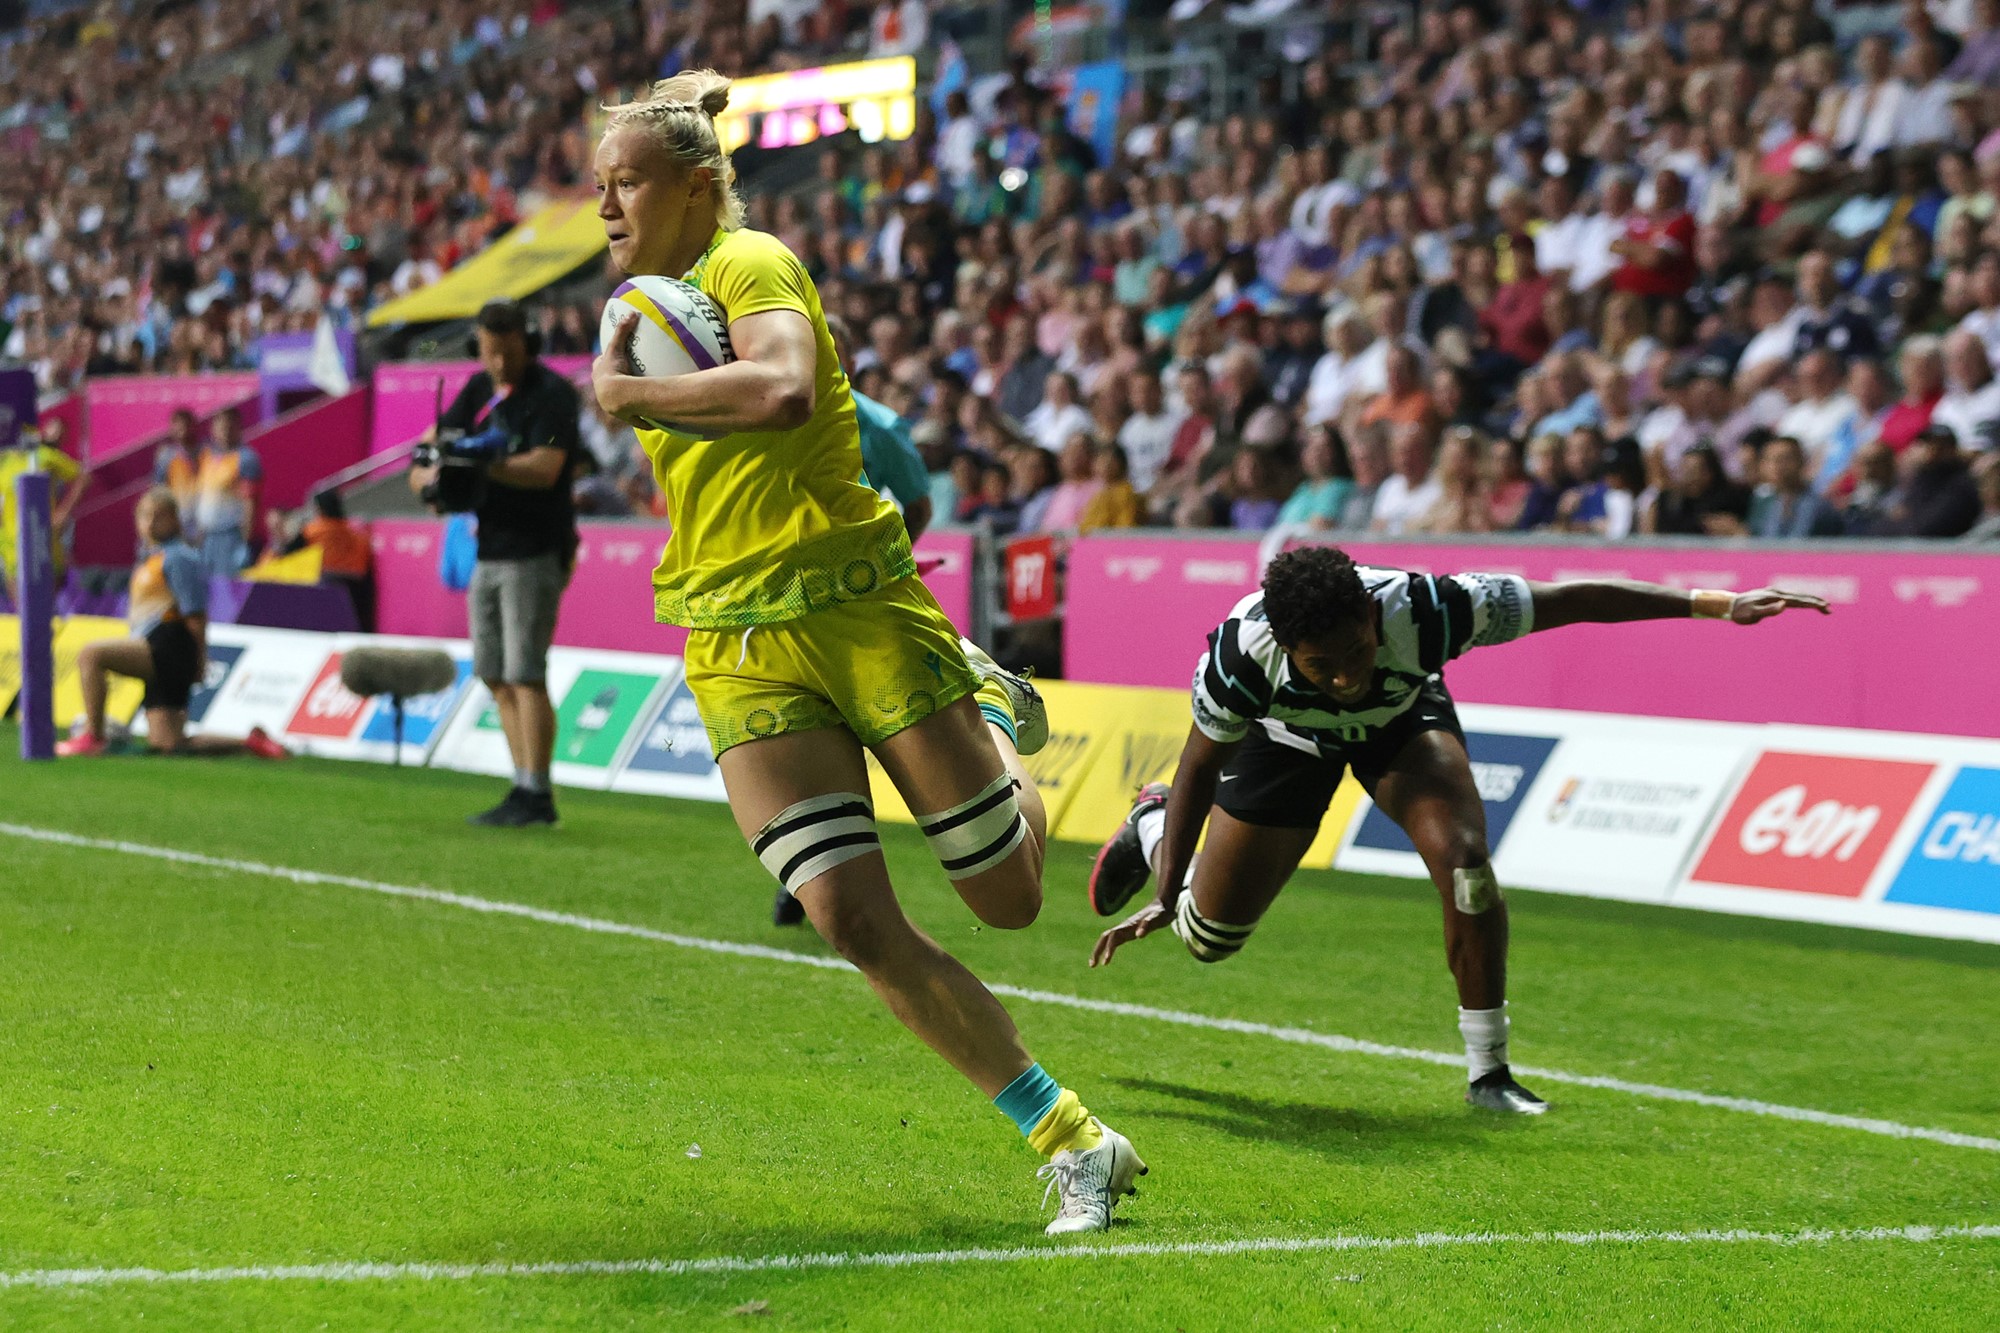 An Australian rugby sevens player runs round to score a try, as her Fijian opponent is left off-balance, behind her.